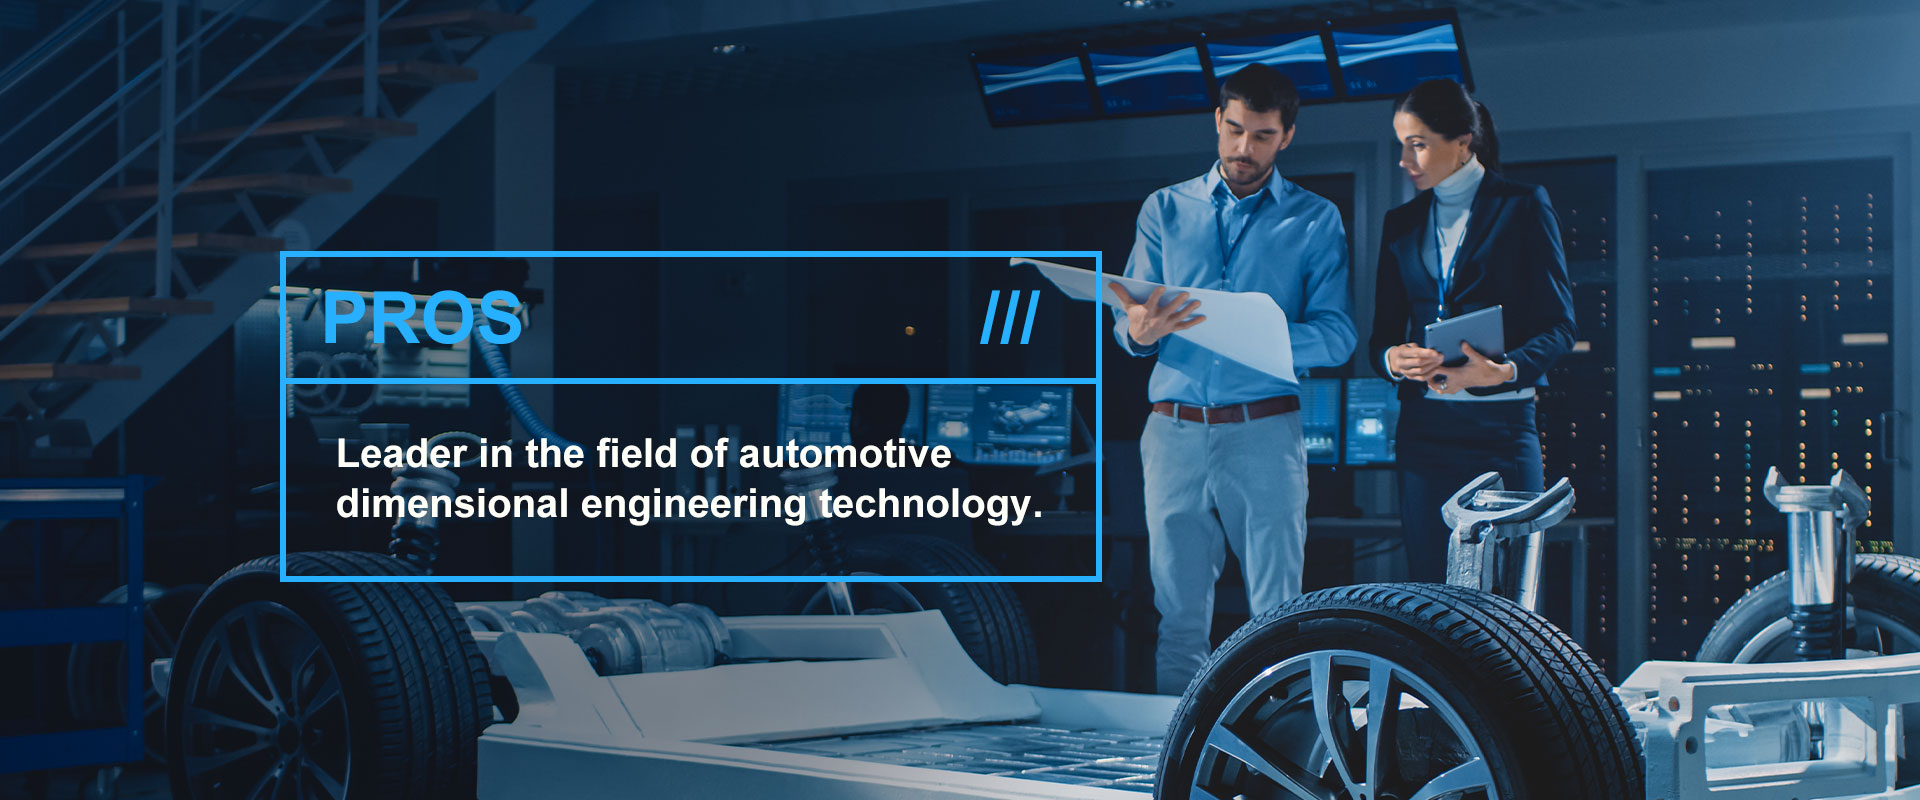 Leader in the field of automotive dimensional engineering technology.